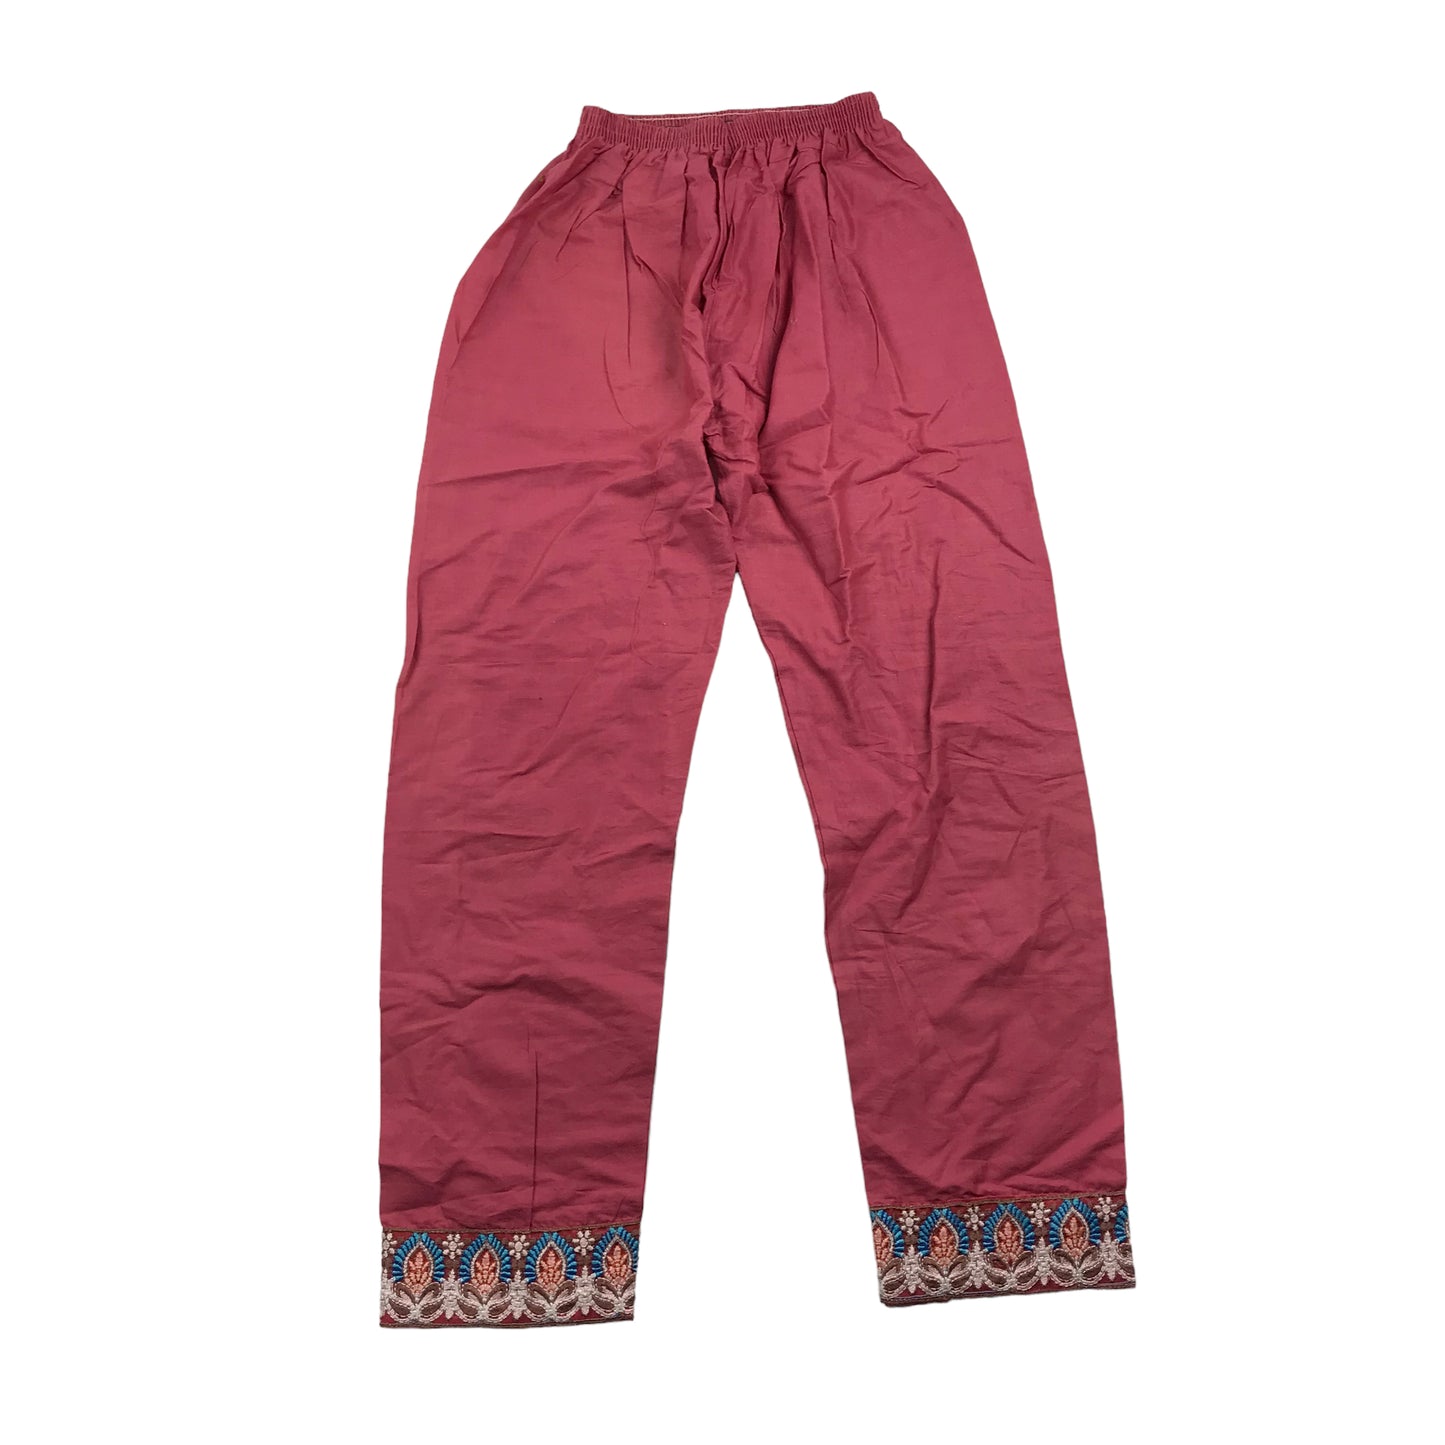 IAF Collection Pink Embroidery Slit Dress and Trousers Age 10